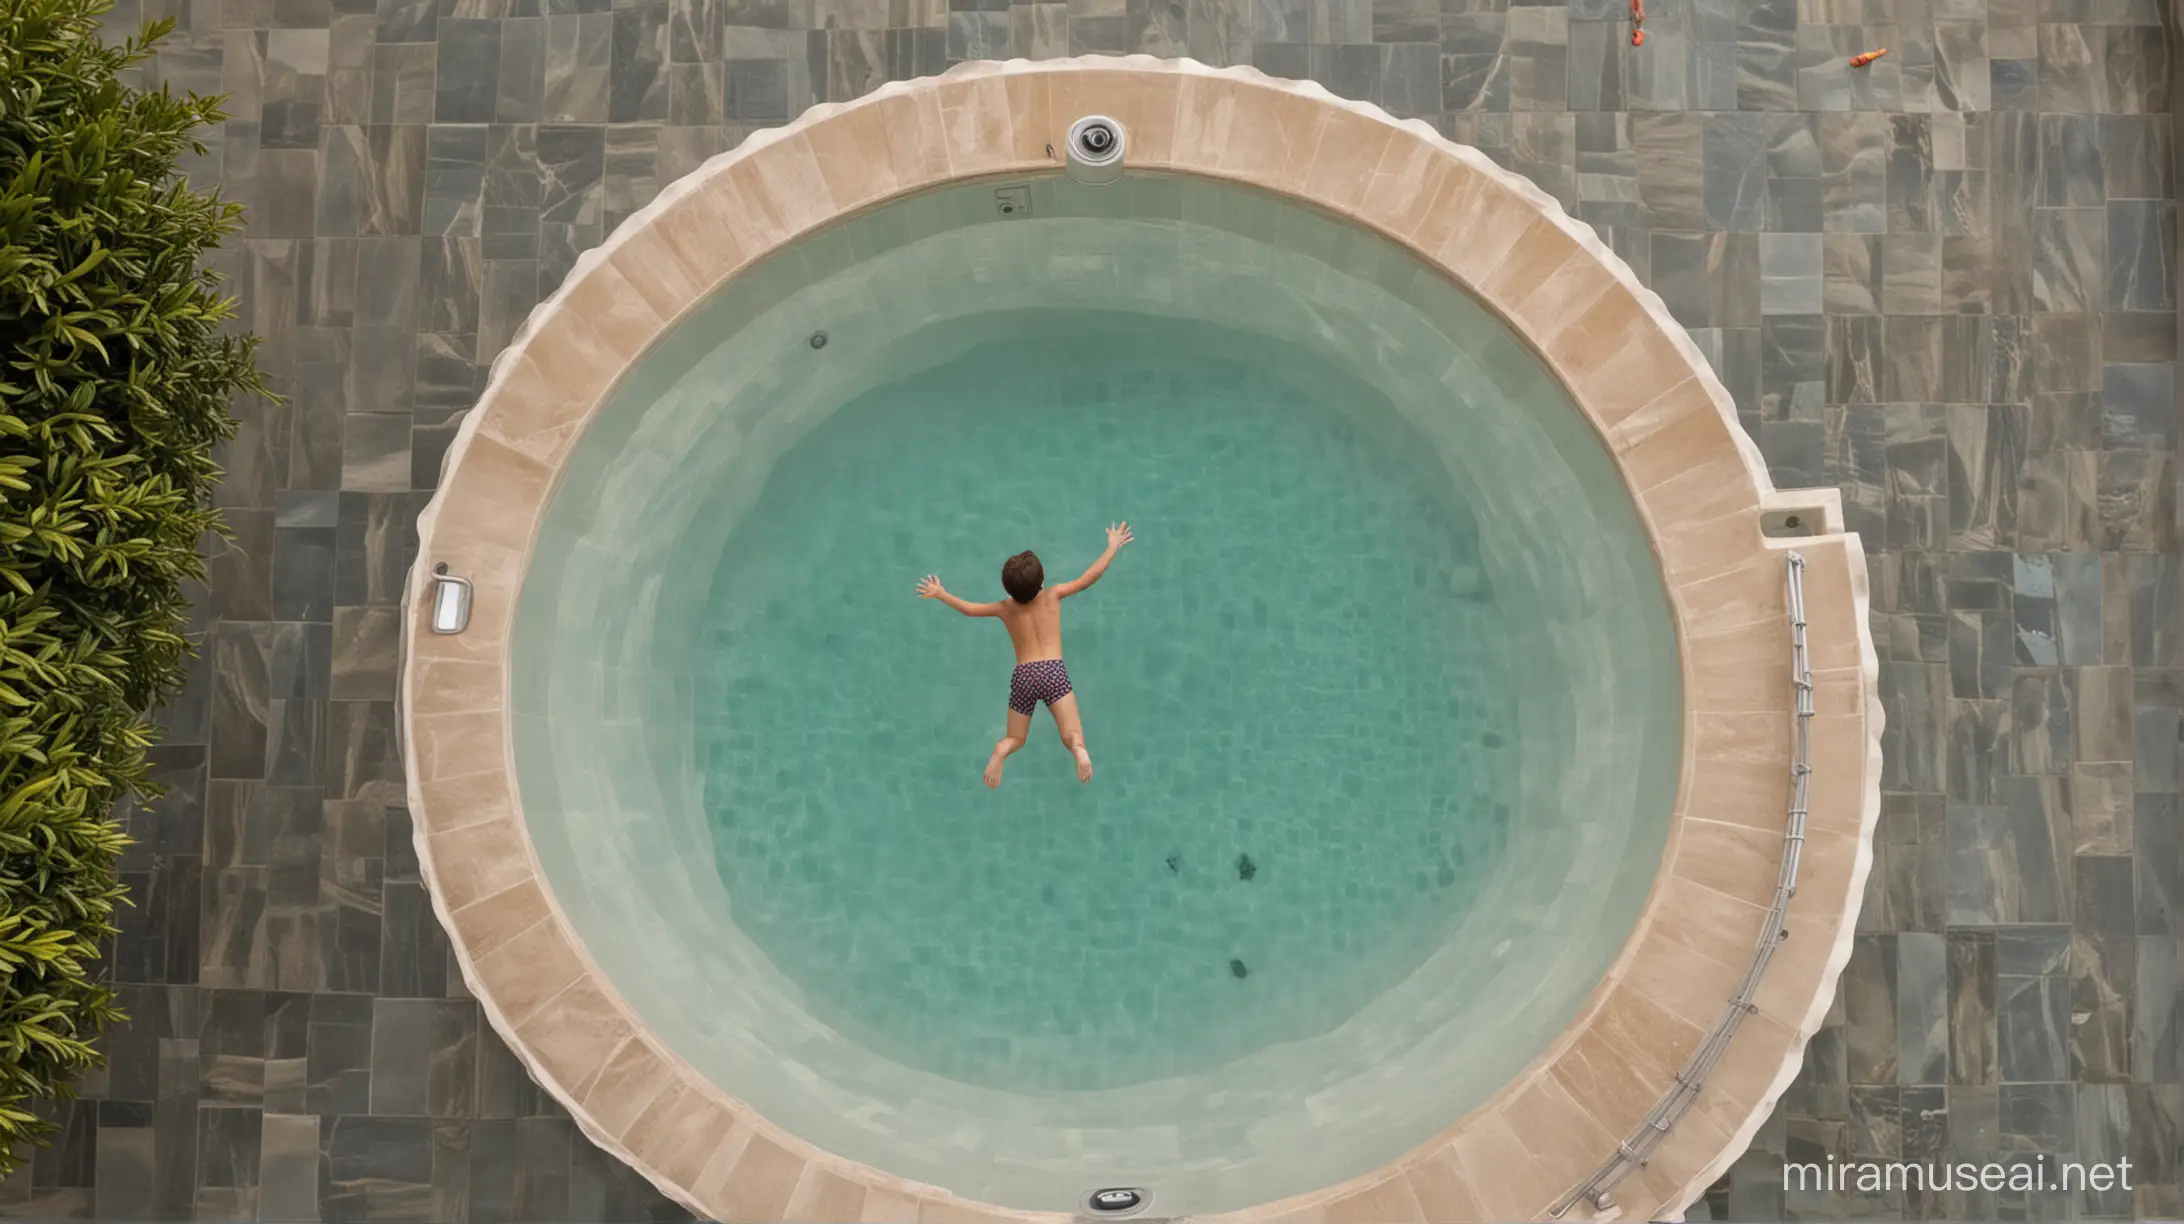 Young Boy Leaping into Luxury Hotel Pool with Round Float